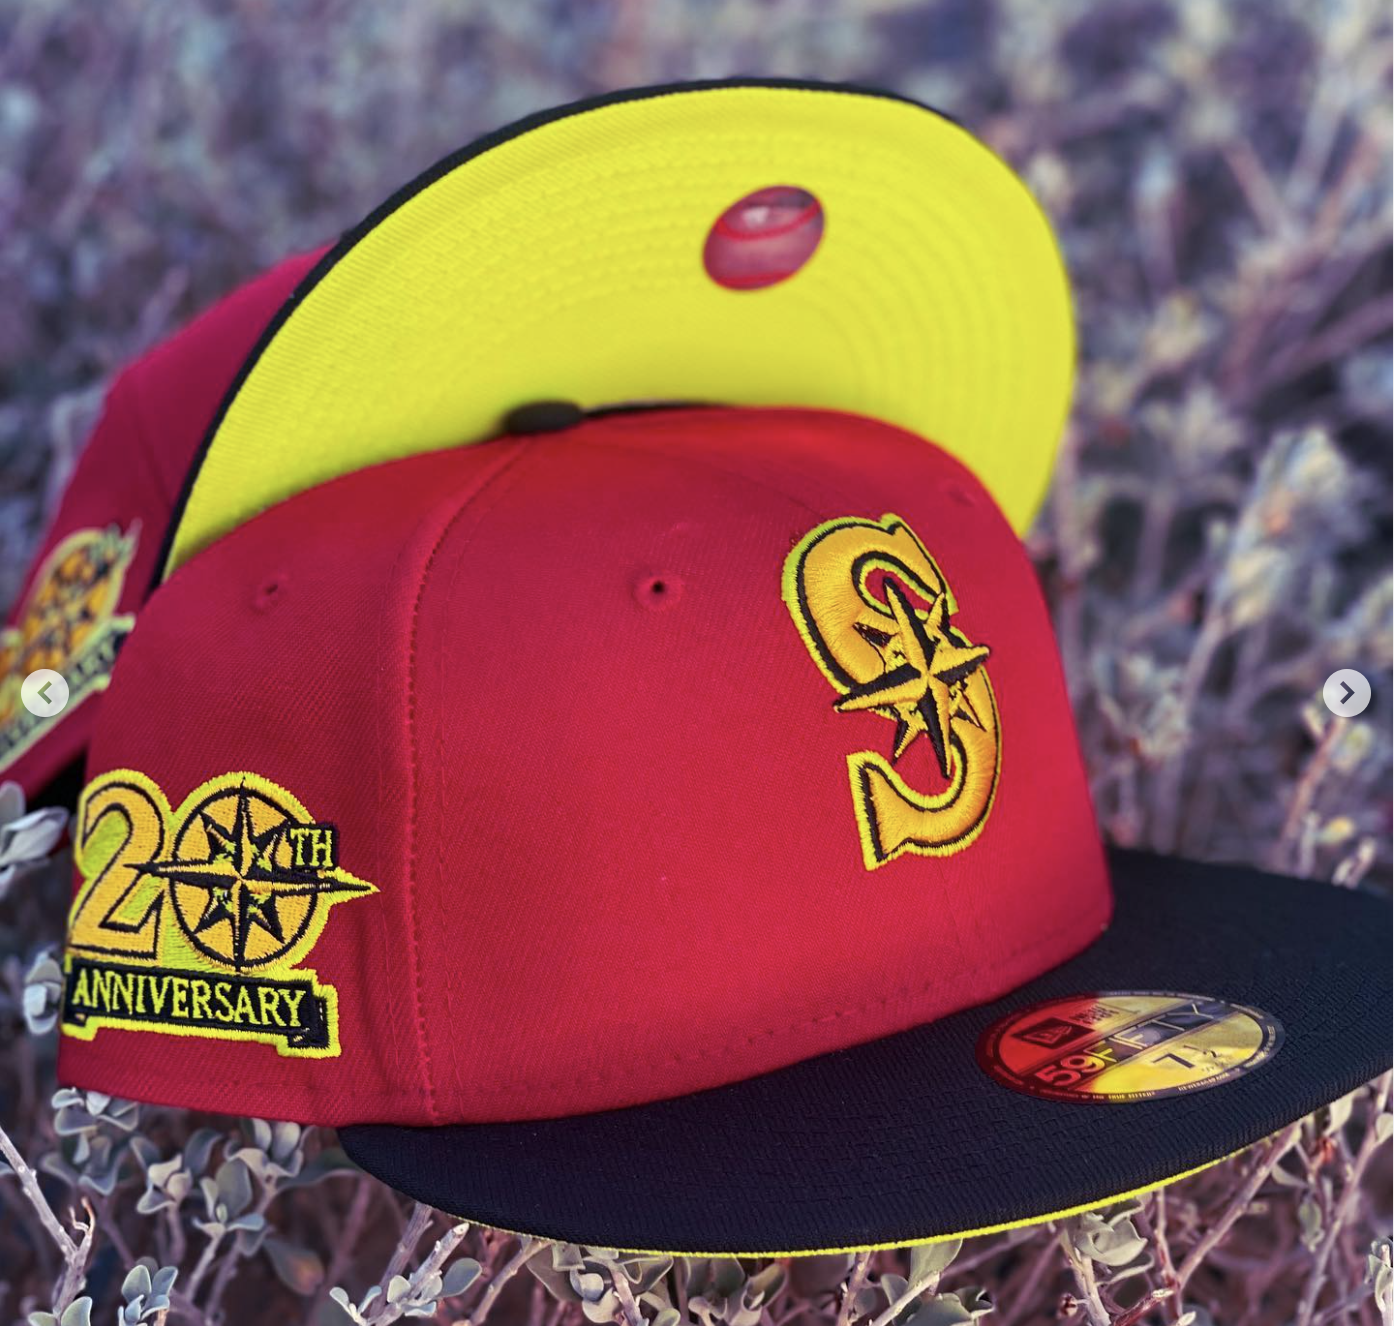 SEATTLE MARINERS 20TH ANNIVERSARY NEW ERA 59FIFTY FITTED HAT ( Scooby Inspired) ZOINKS